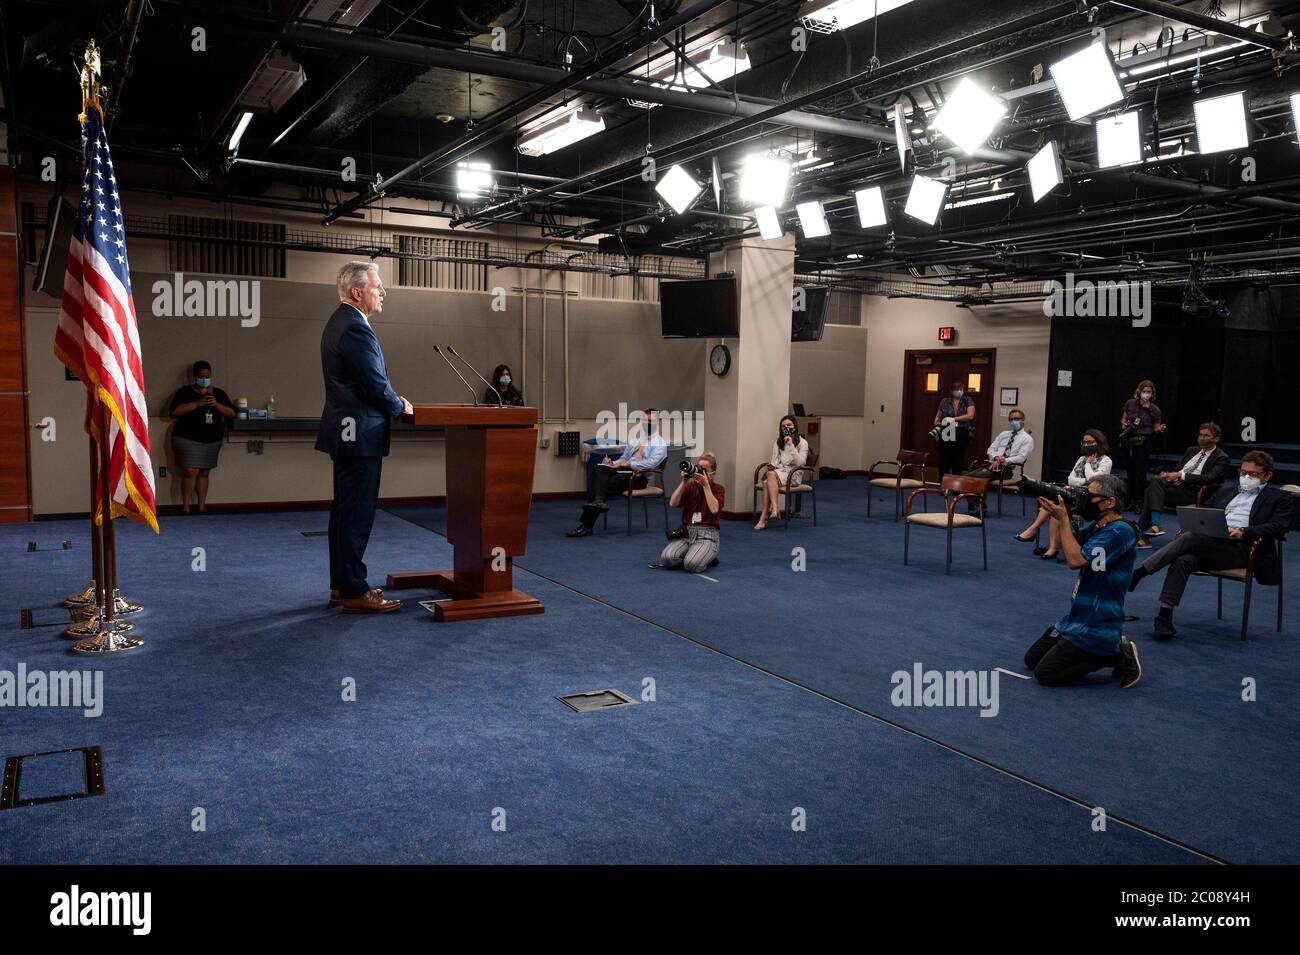 Washington, DC, USA. 11th June, 2020. June 11, 2020 - Washington, DC, United States: House Minority Leader KEVIN MCCARTHY (R-CA) at his weekly press conference. Credit: Michael Brochstein/ZUMA Wire/Alamy Live News Stock Photo